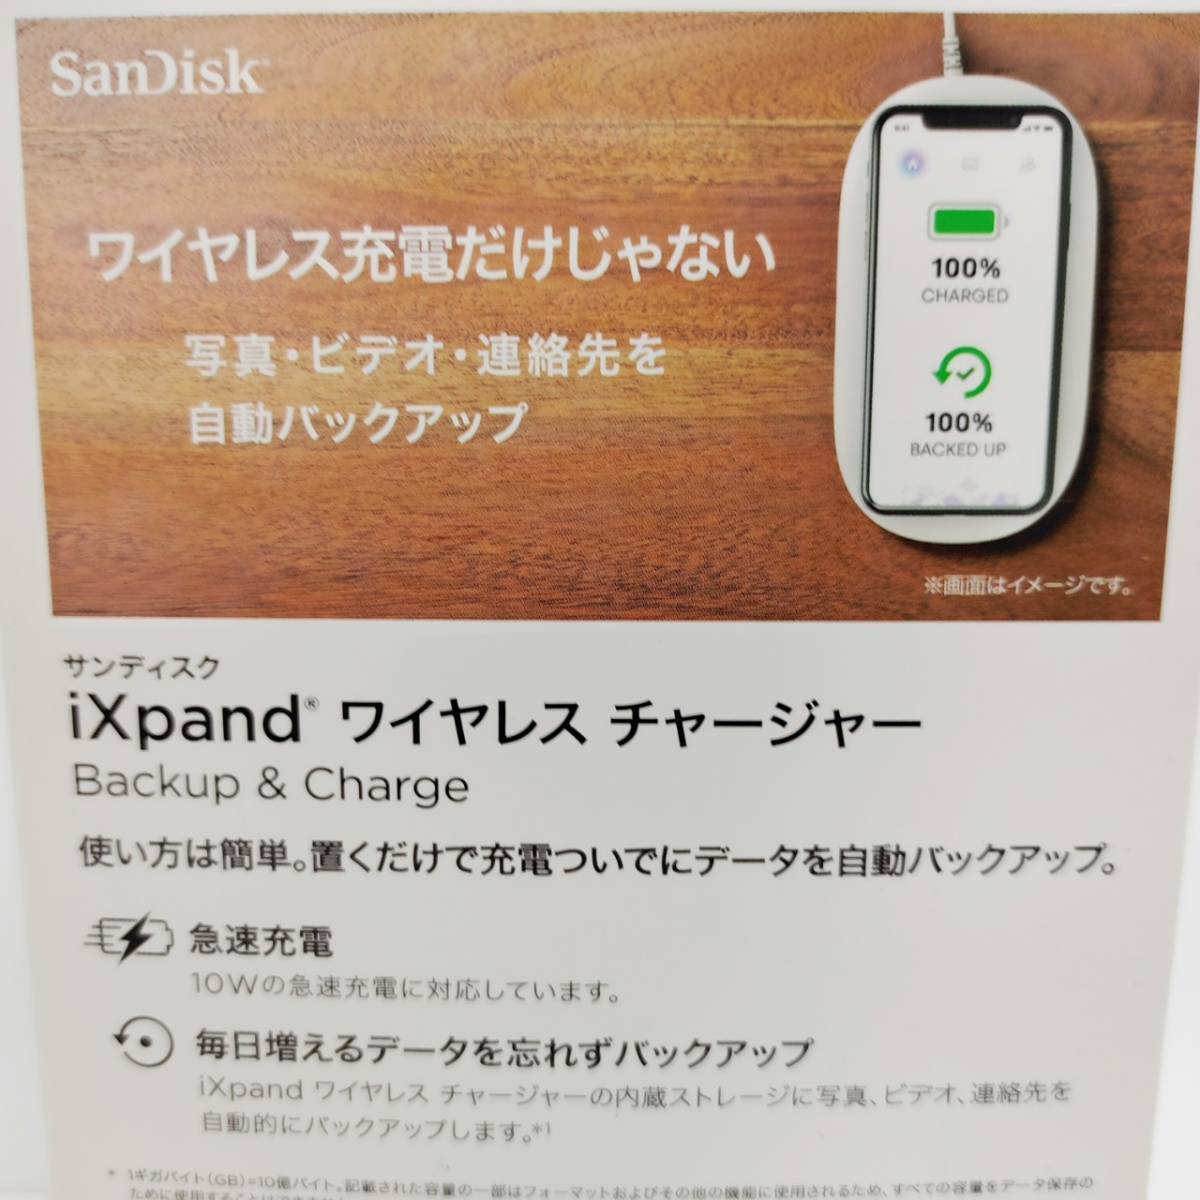 * unused SanDisk iXpand wireless charger SanDisk unopened Backup&Charge charger put only backup S2129